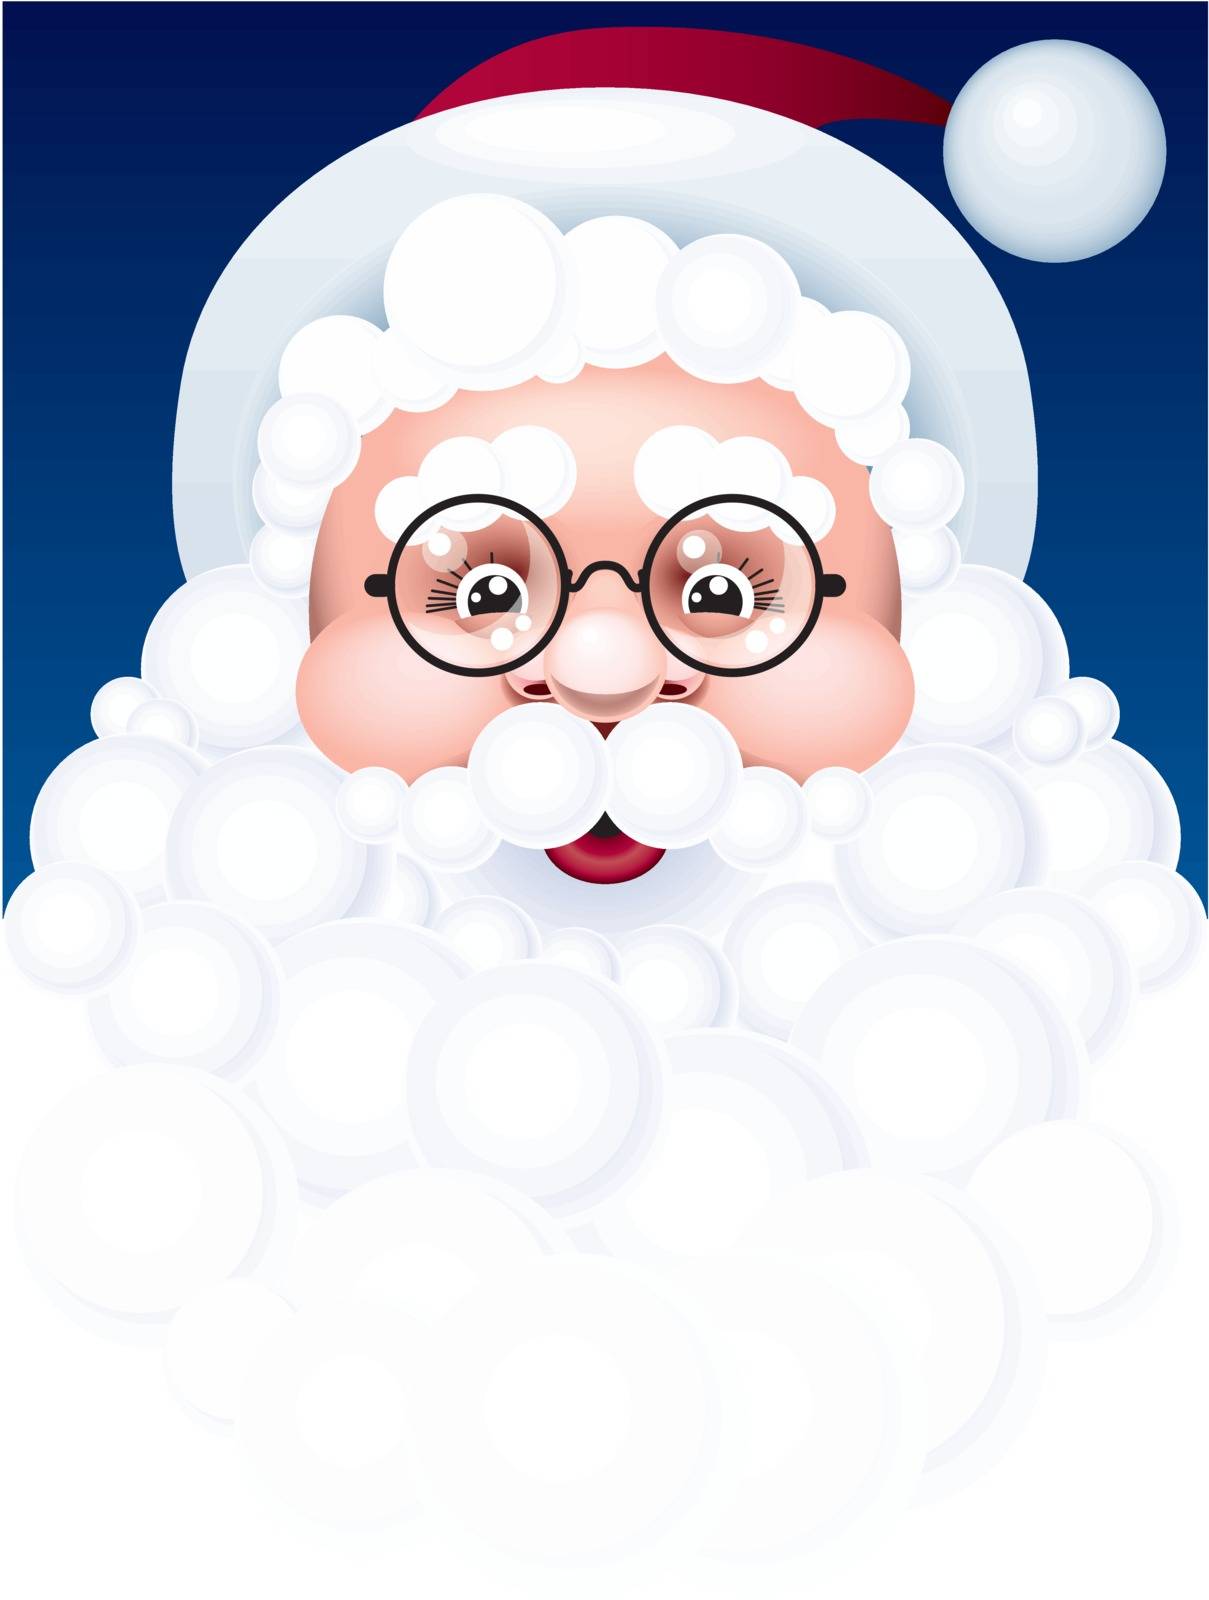 Santa face. Eps8. CMYK. Global colors. Organized by layers. Gradients used.